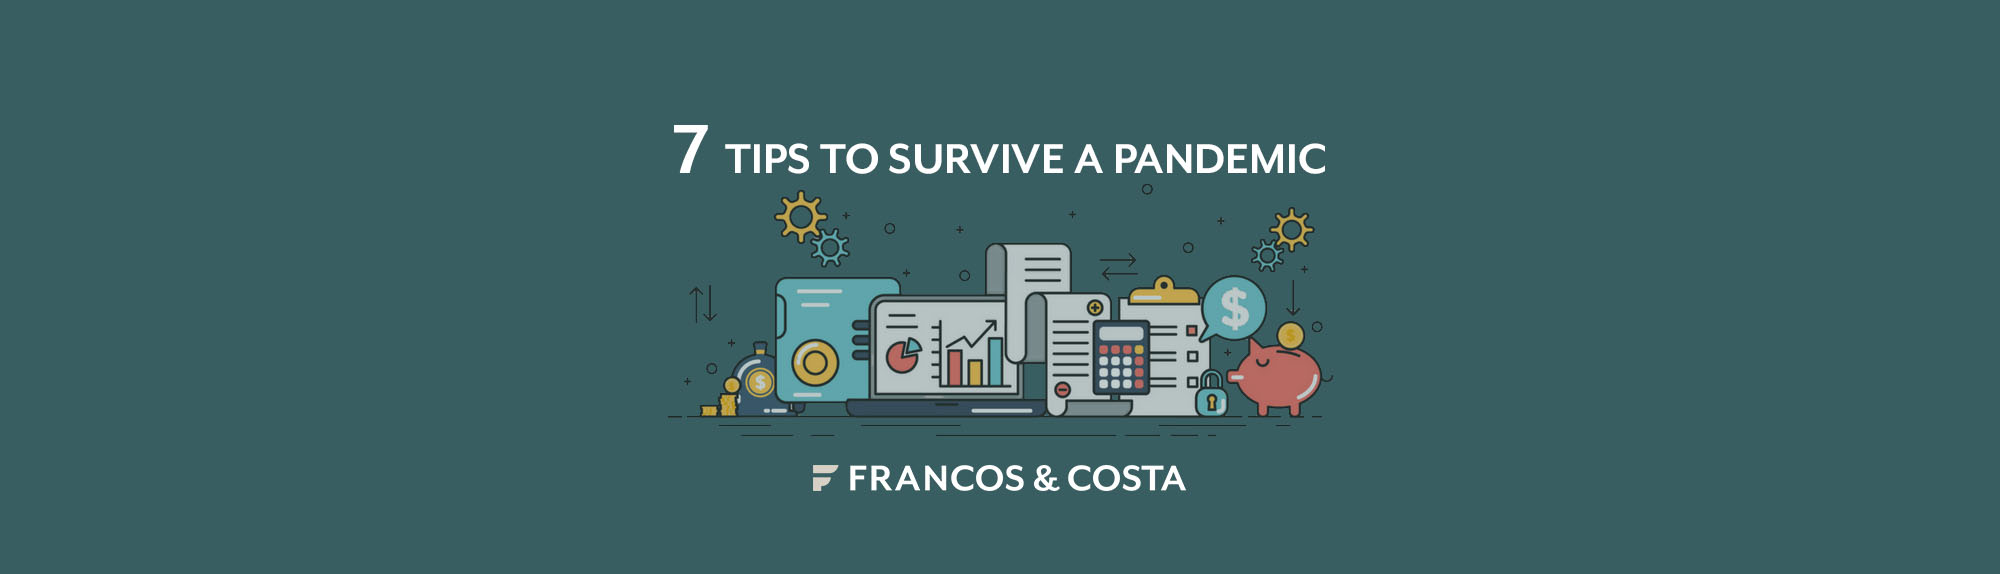 architectural-visualisation-studio-7-tips-to-survive-a-pandemic